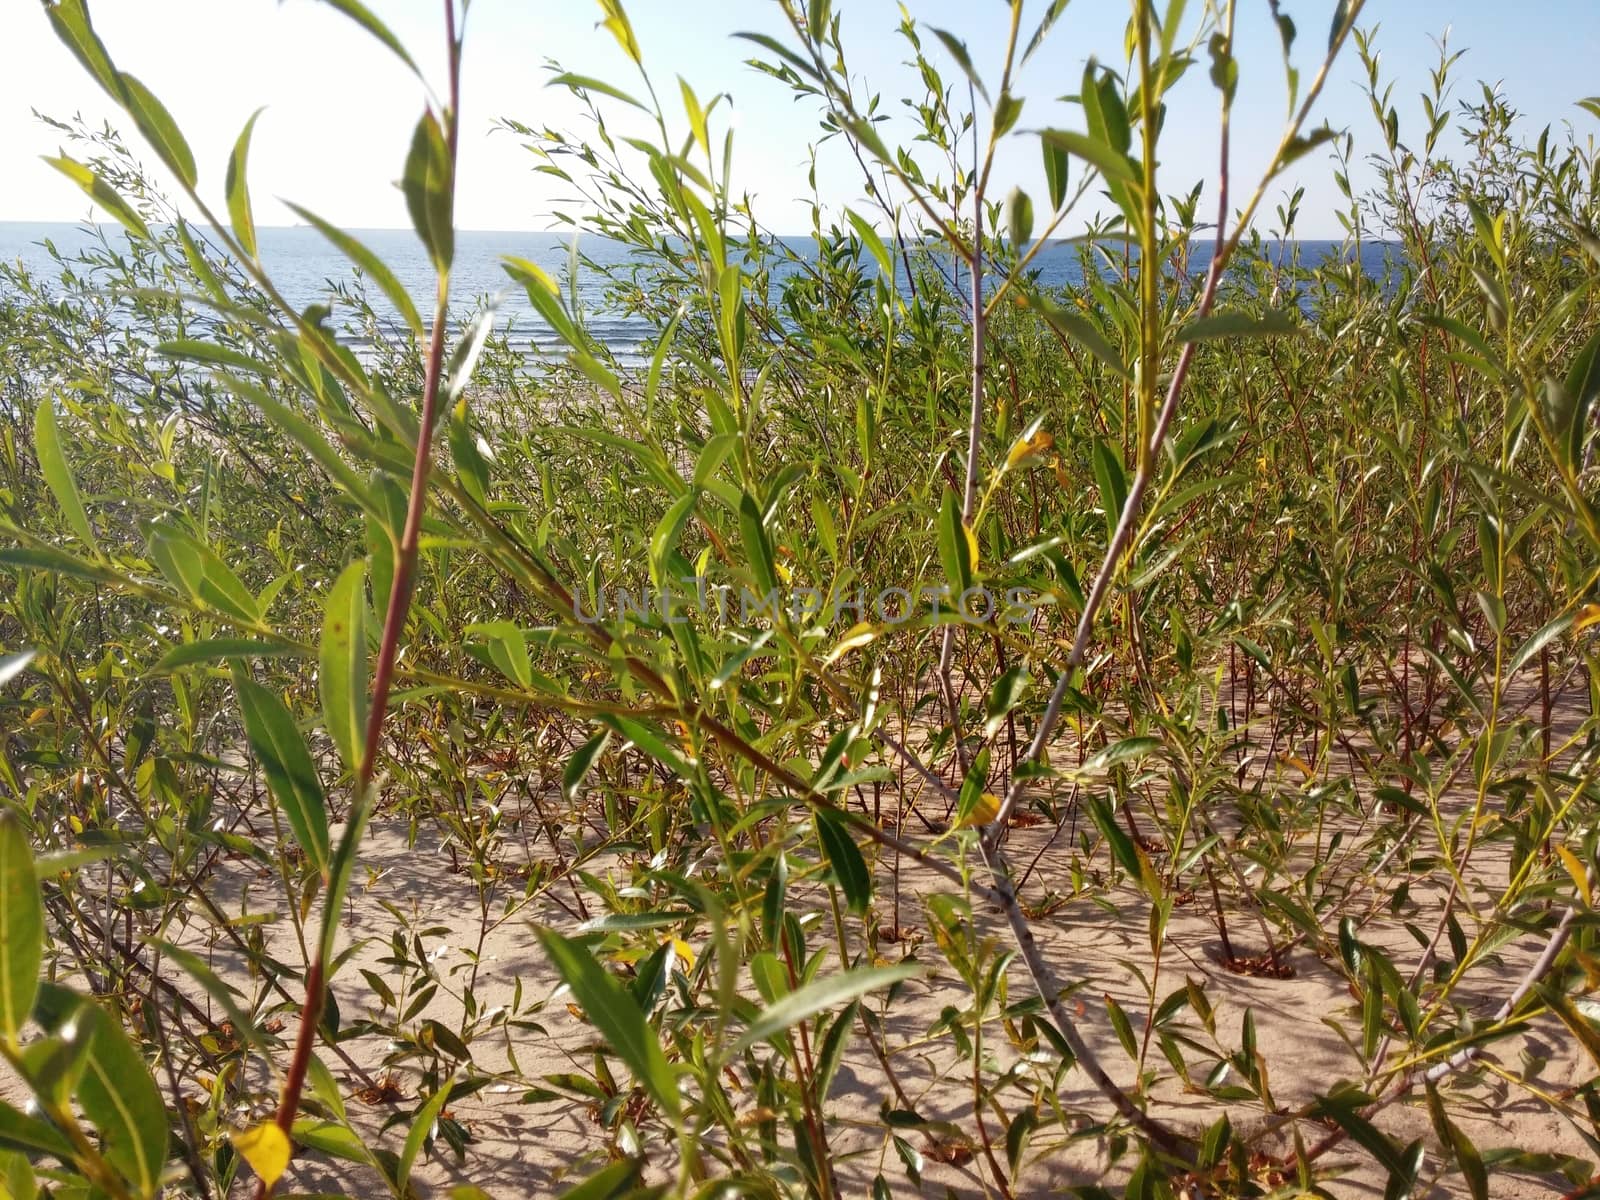 Plants growing at the Baltic beach by dolfinvik